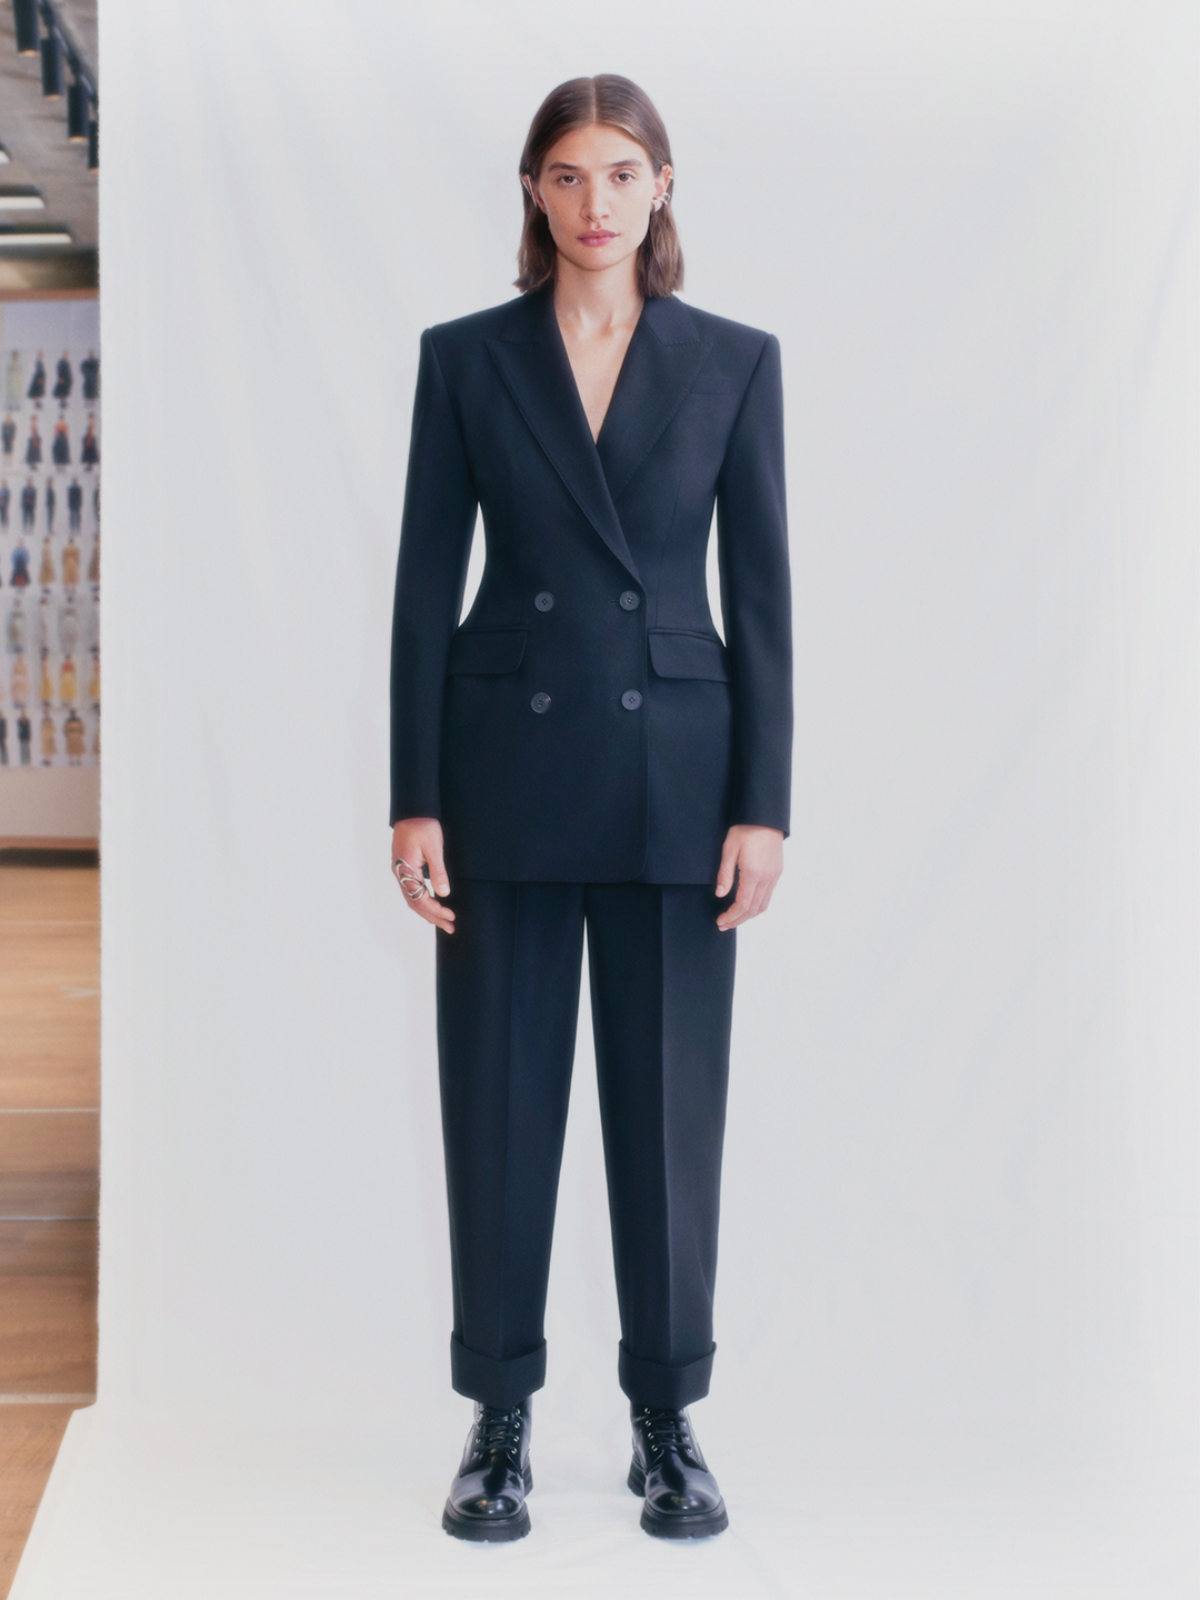 Alexander McQueen's New Season Tailoring Is Stripped To The Bone